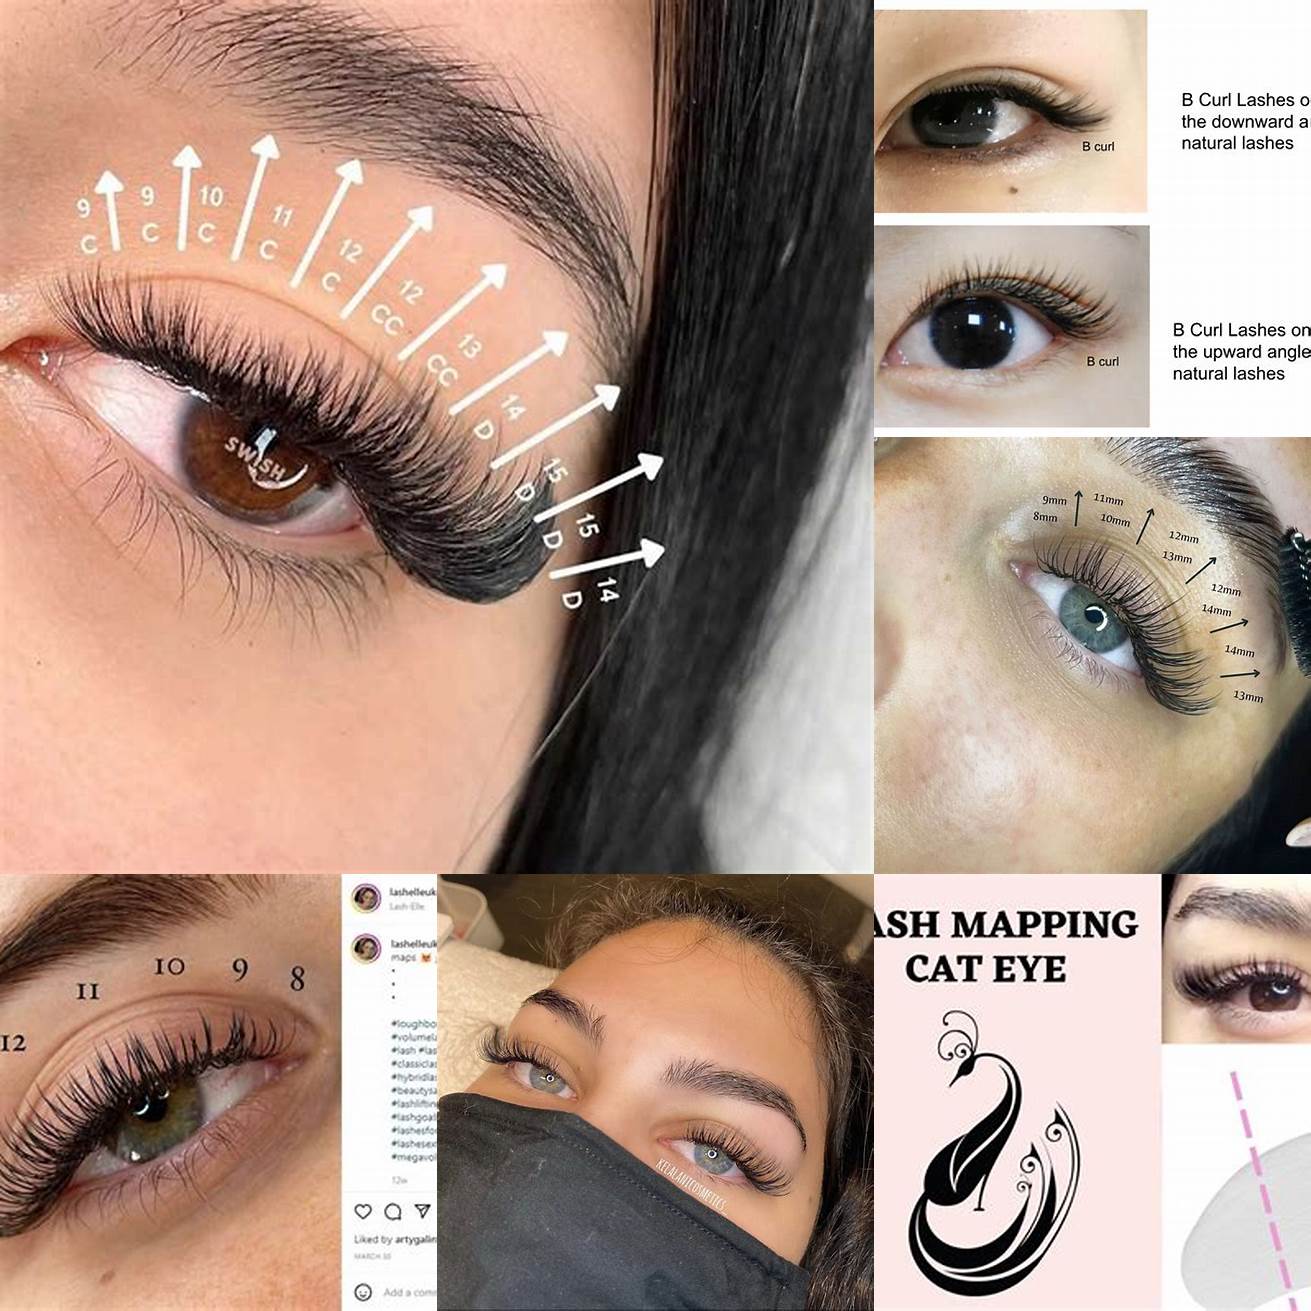 Thicken the line along your upper lash line